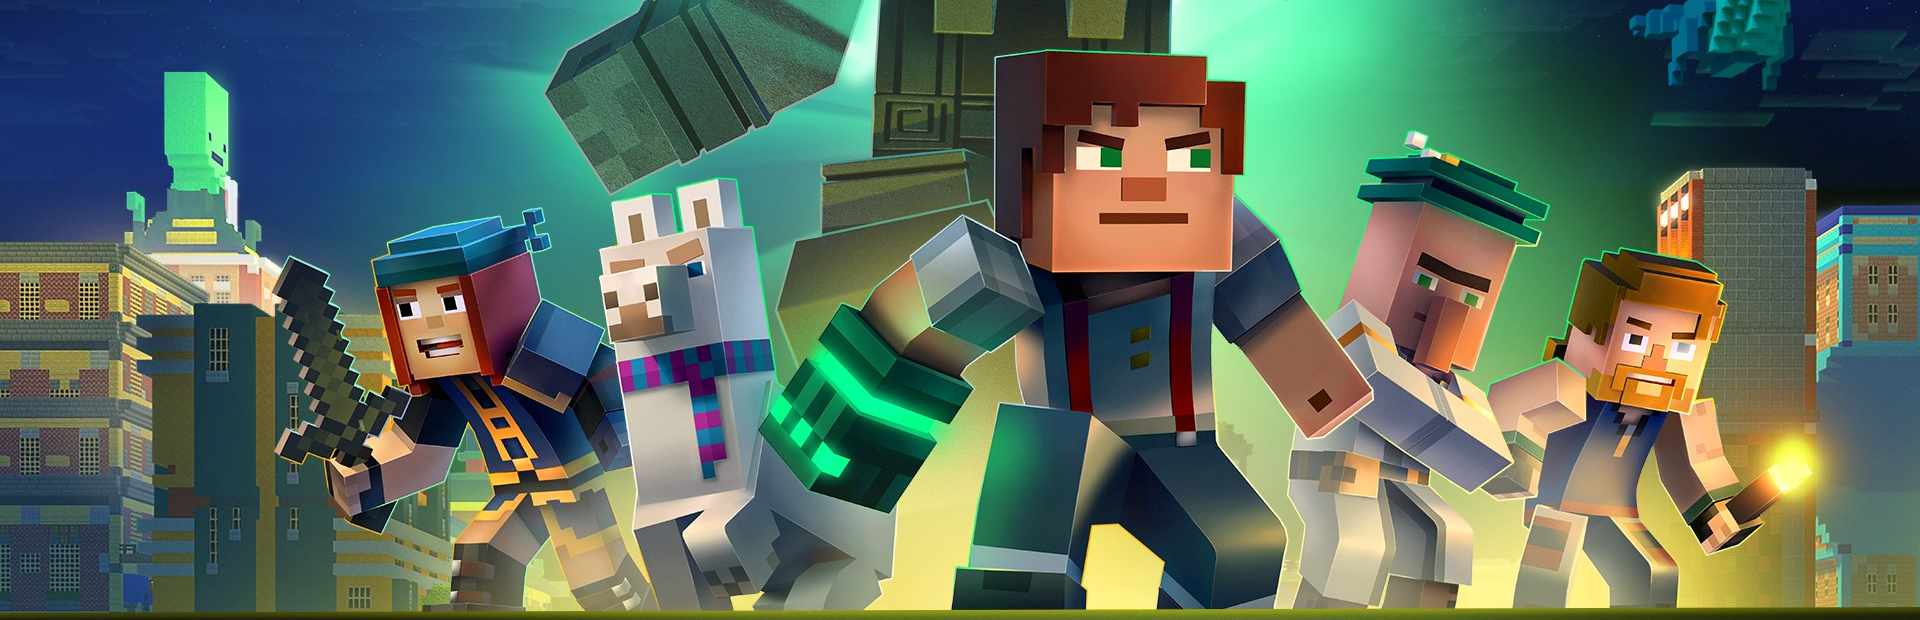 News - Now Available on Steam - Minecraft: Story Mode - Season Two